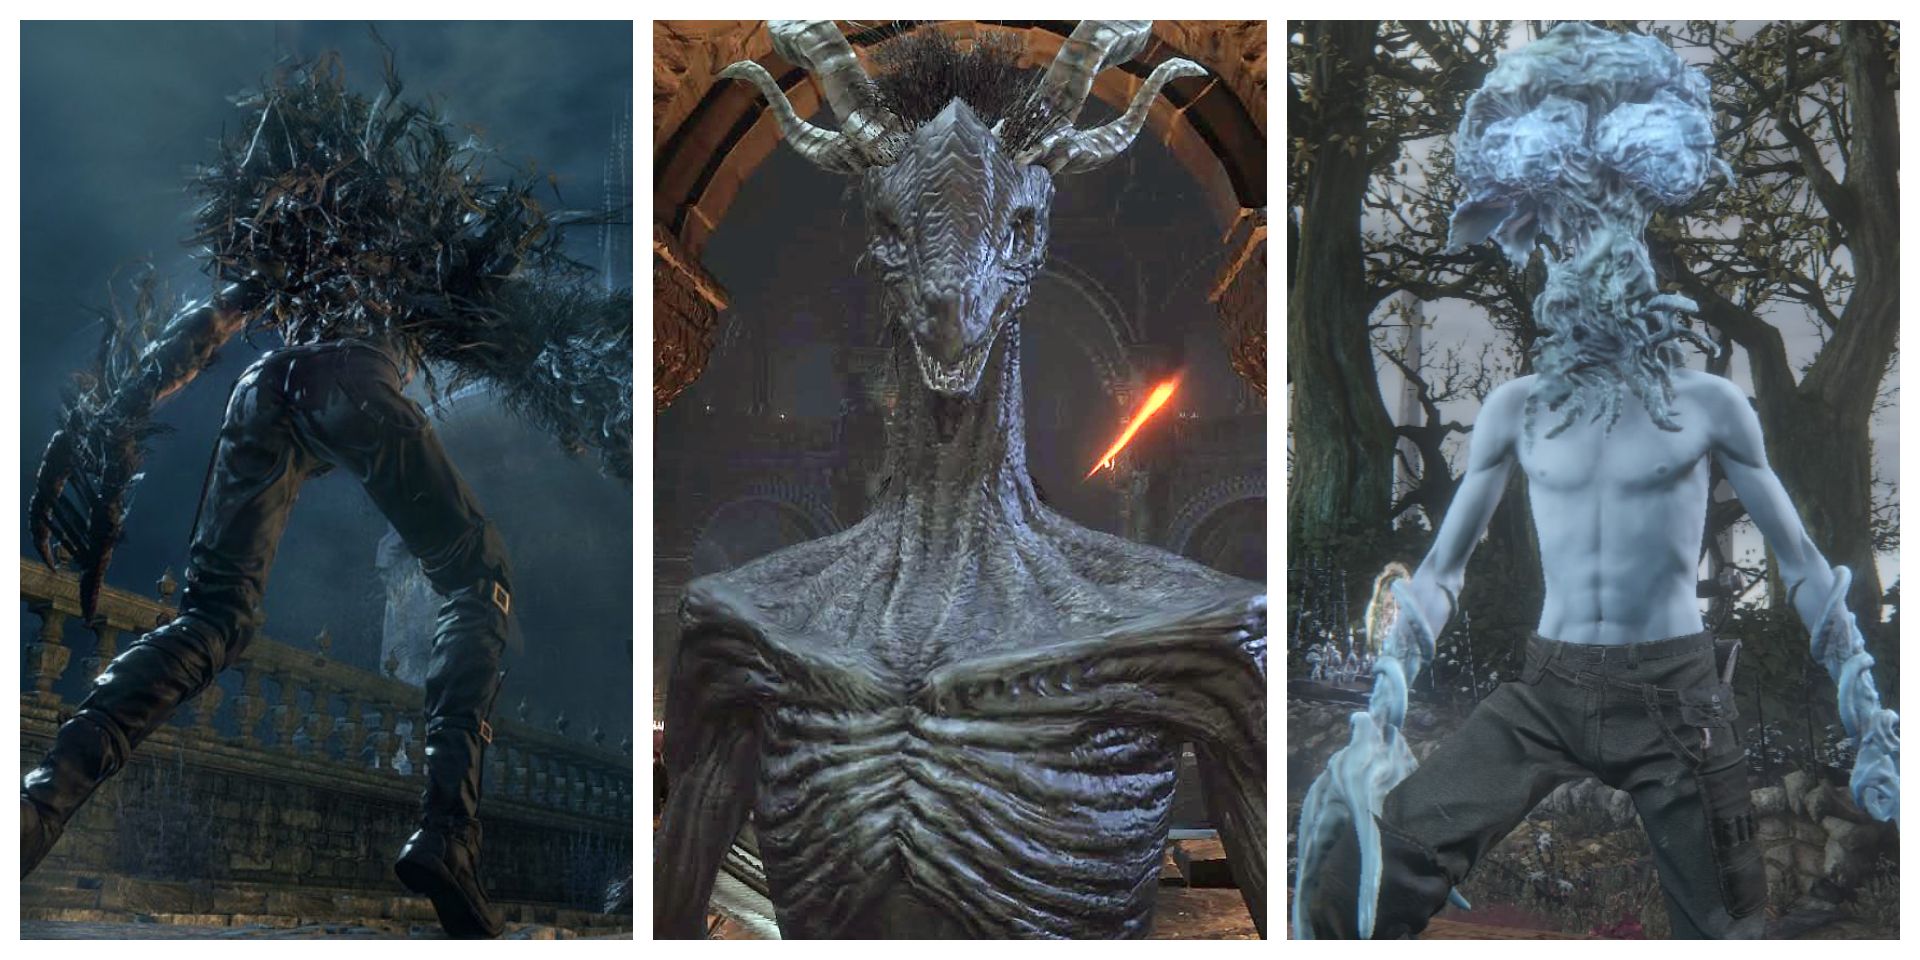 The Beast and Kin Body Transformations from Bloodborne as well as the Dragon Form in Dark Souls 3.